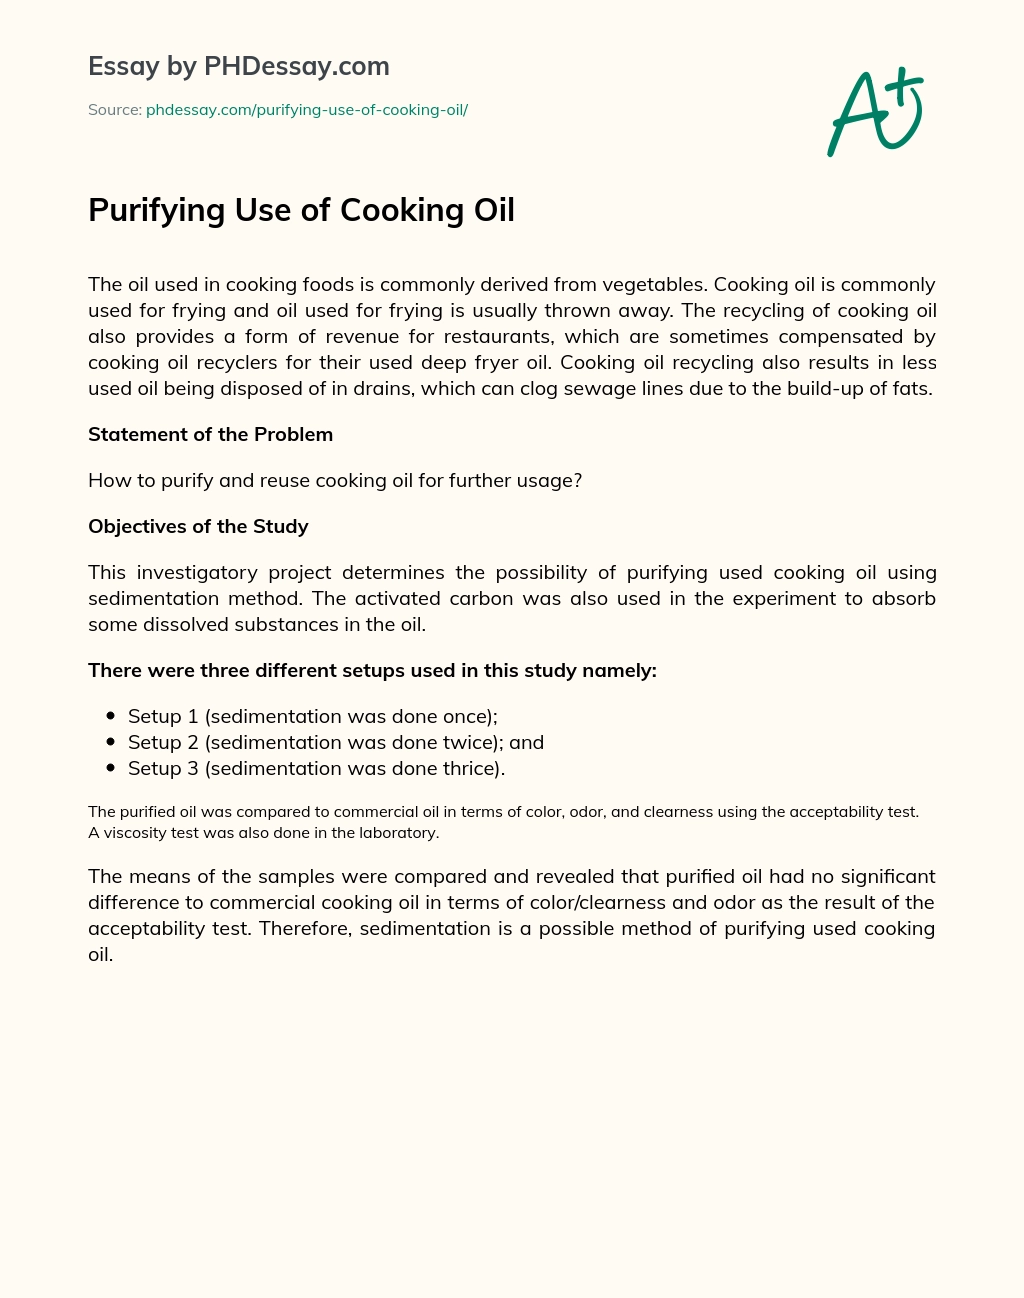 Purifying Use of Cooking Oil essay